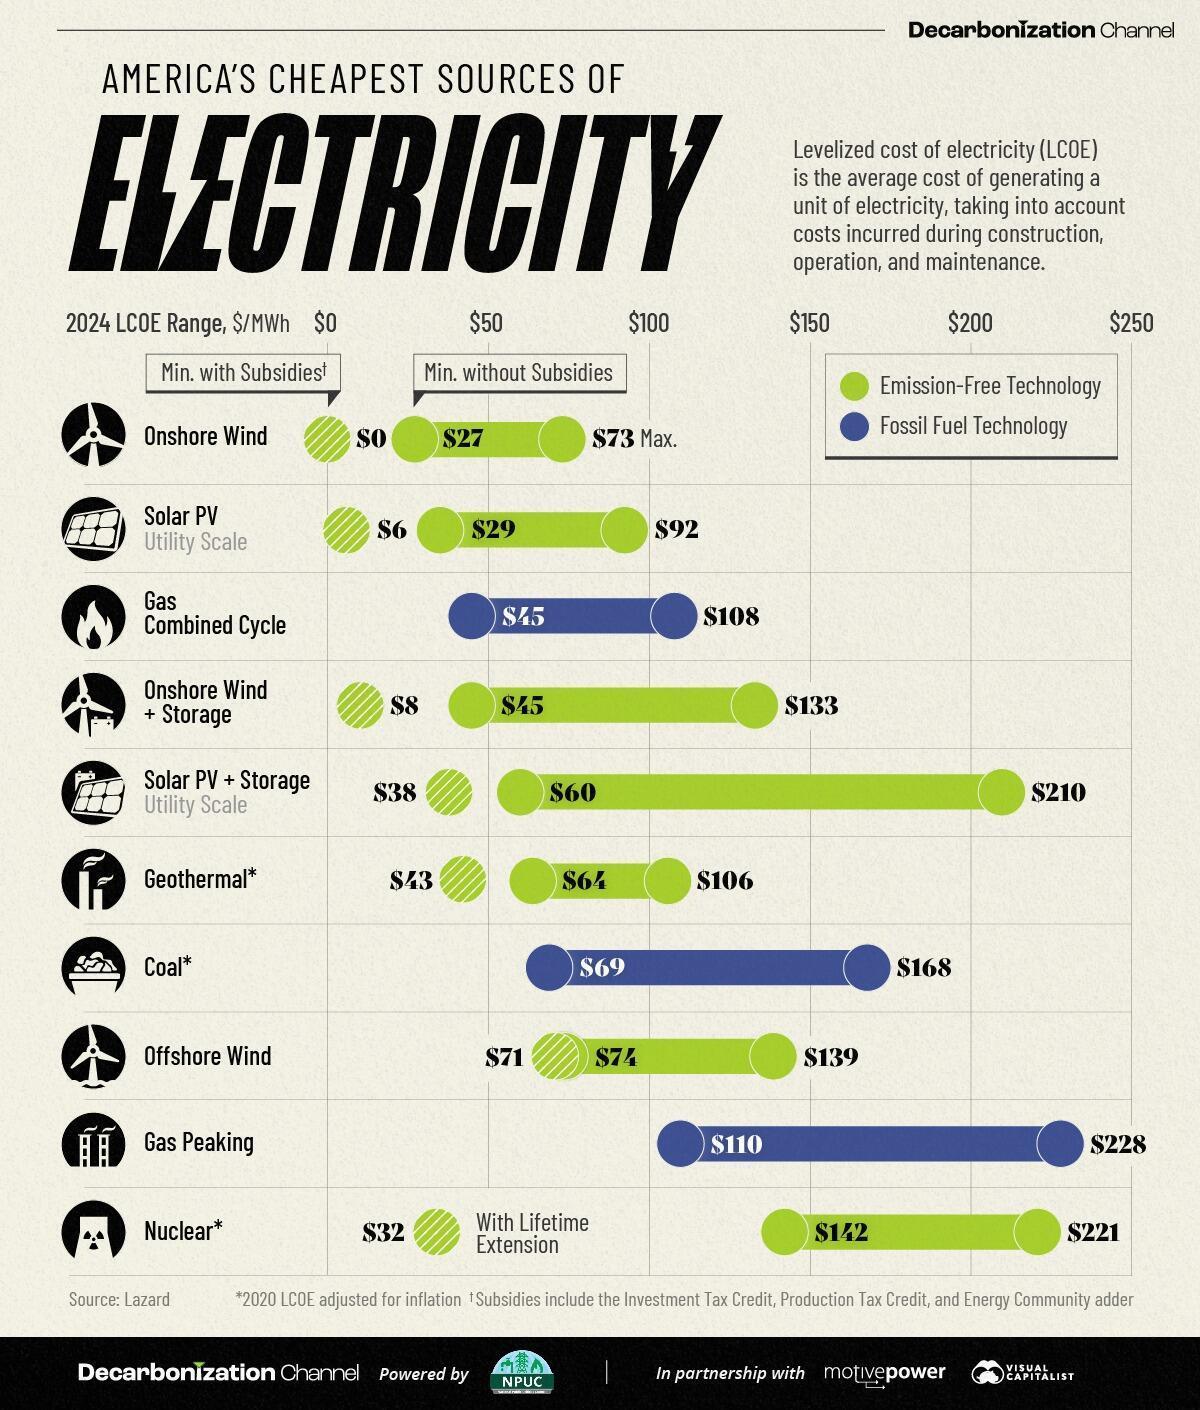 What is the cheapest energy source in America?